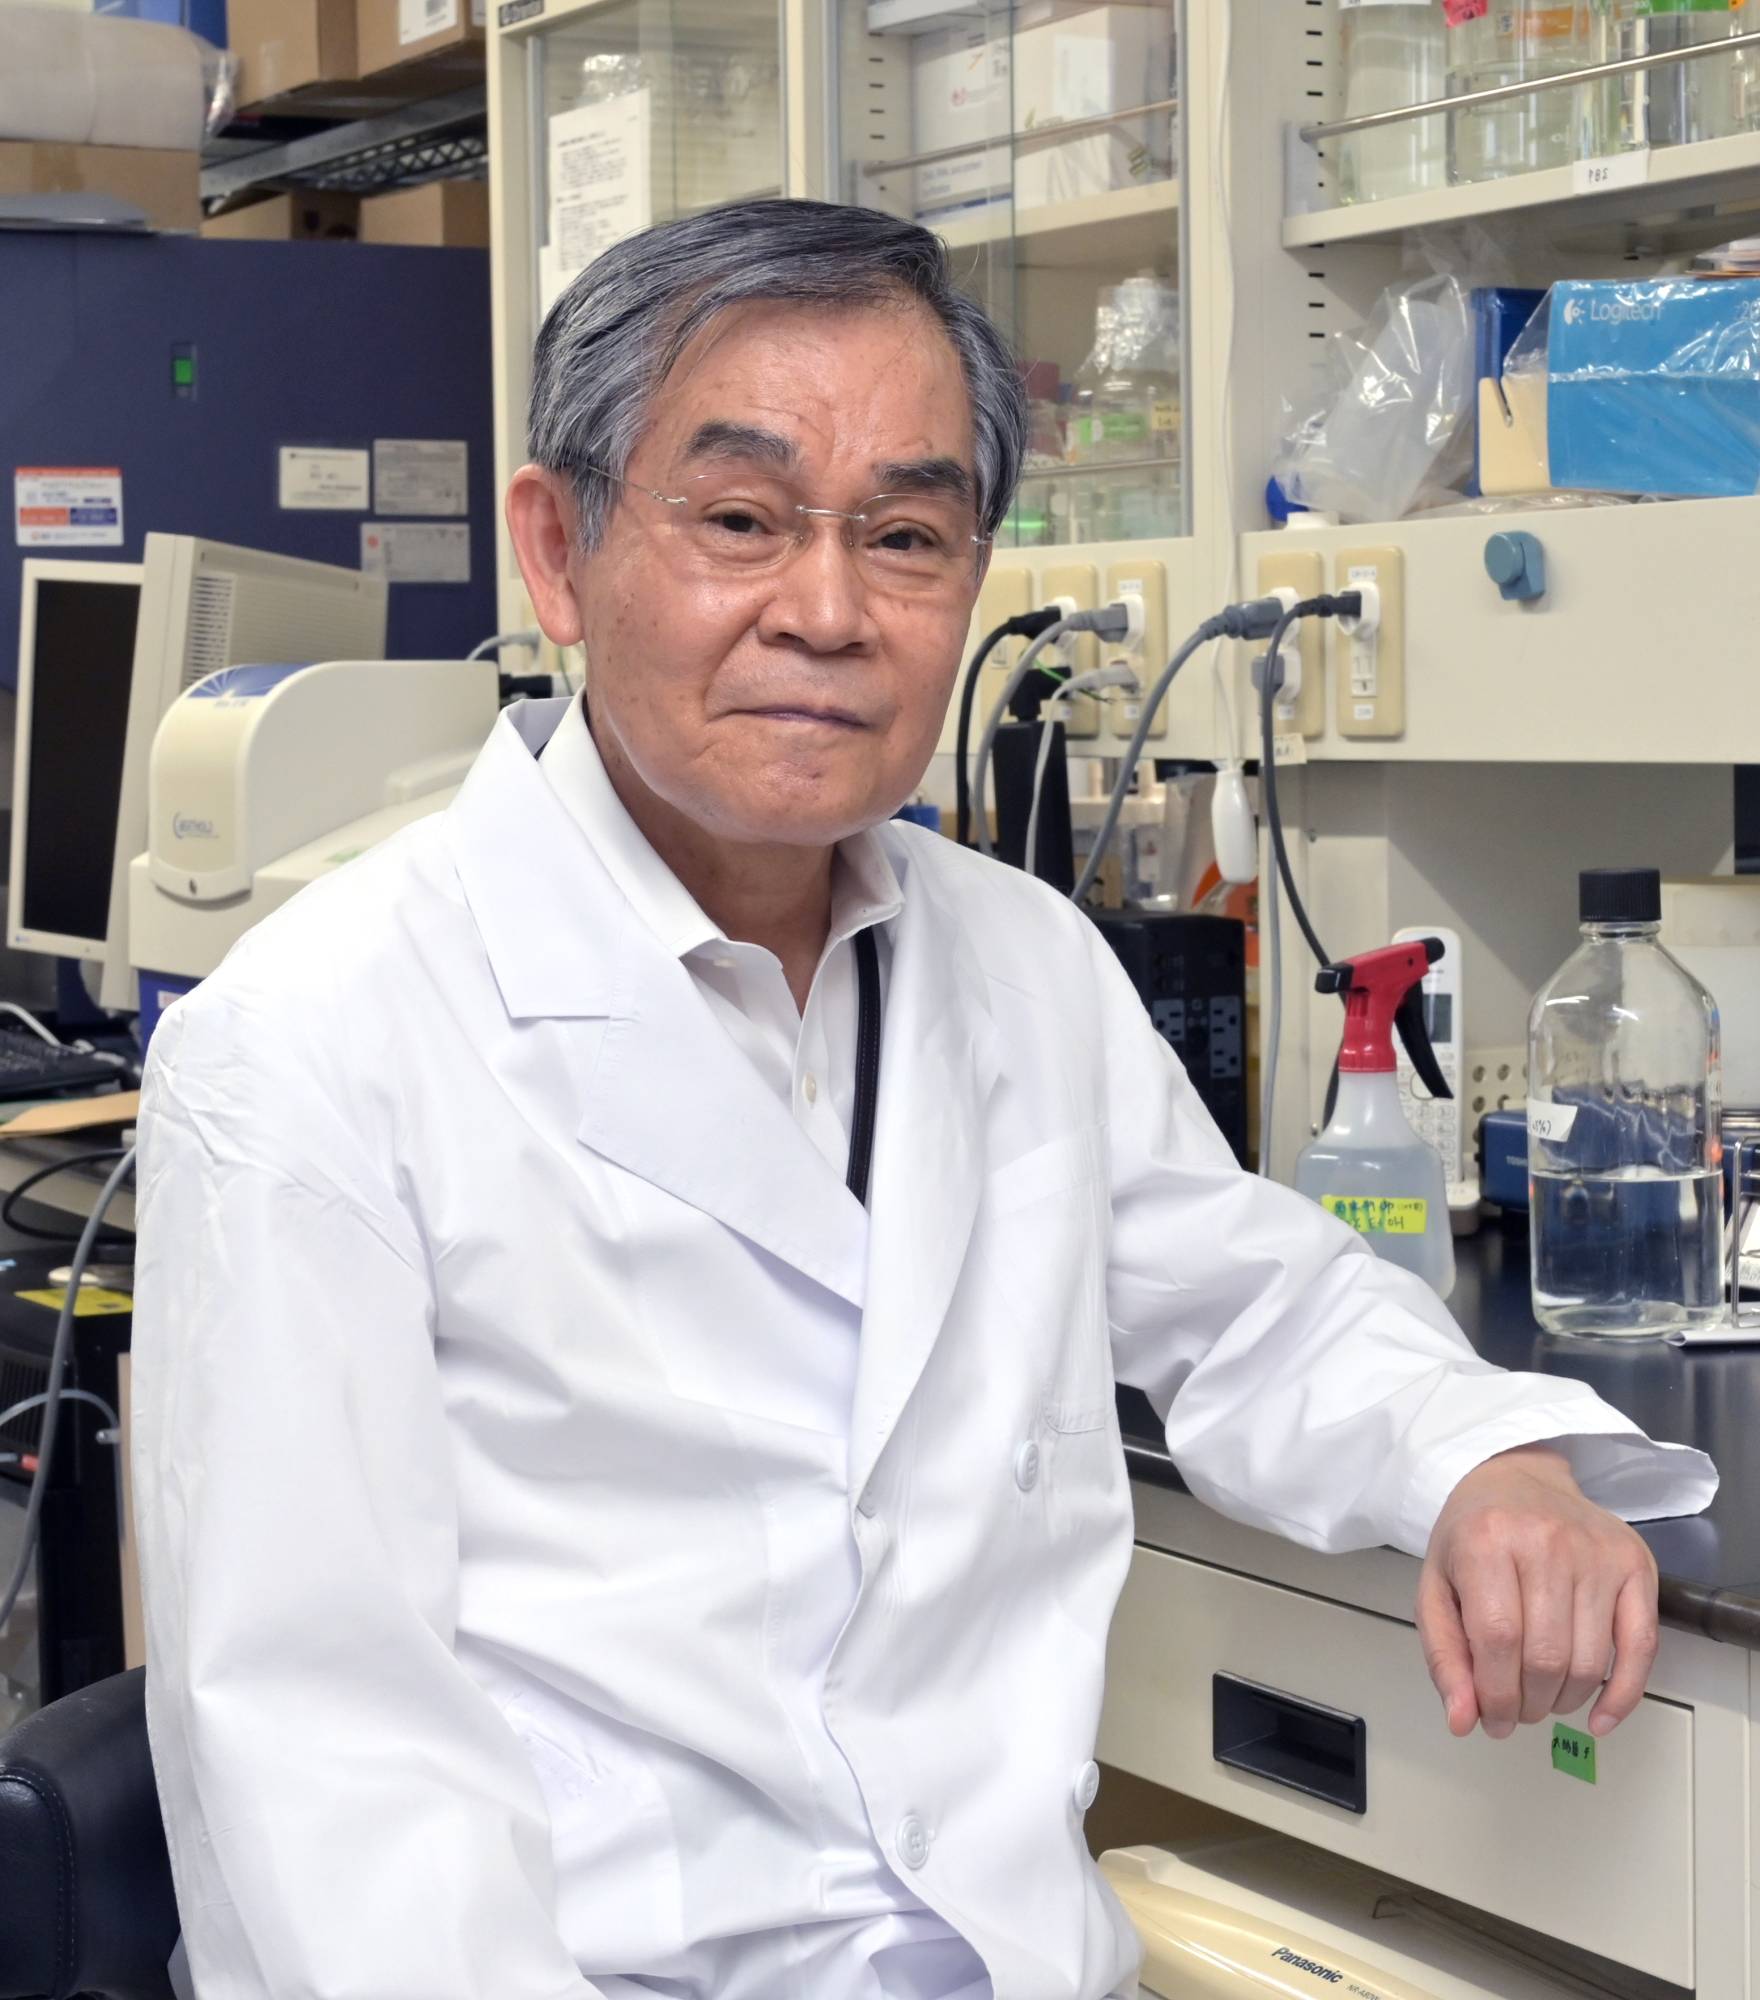 Will Japan eliminate COVID-19 with a vaccine that gives lifelong immunity?